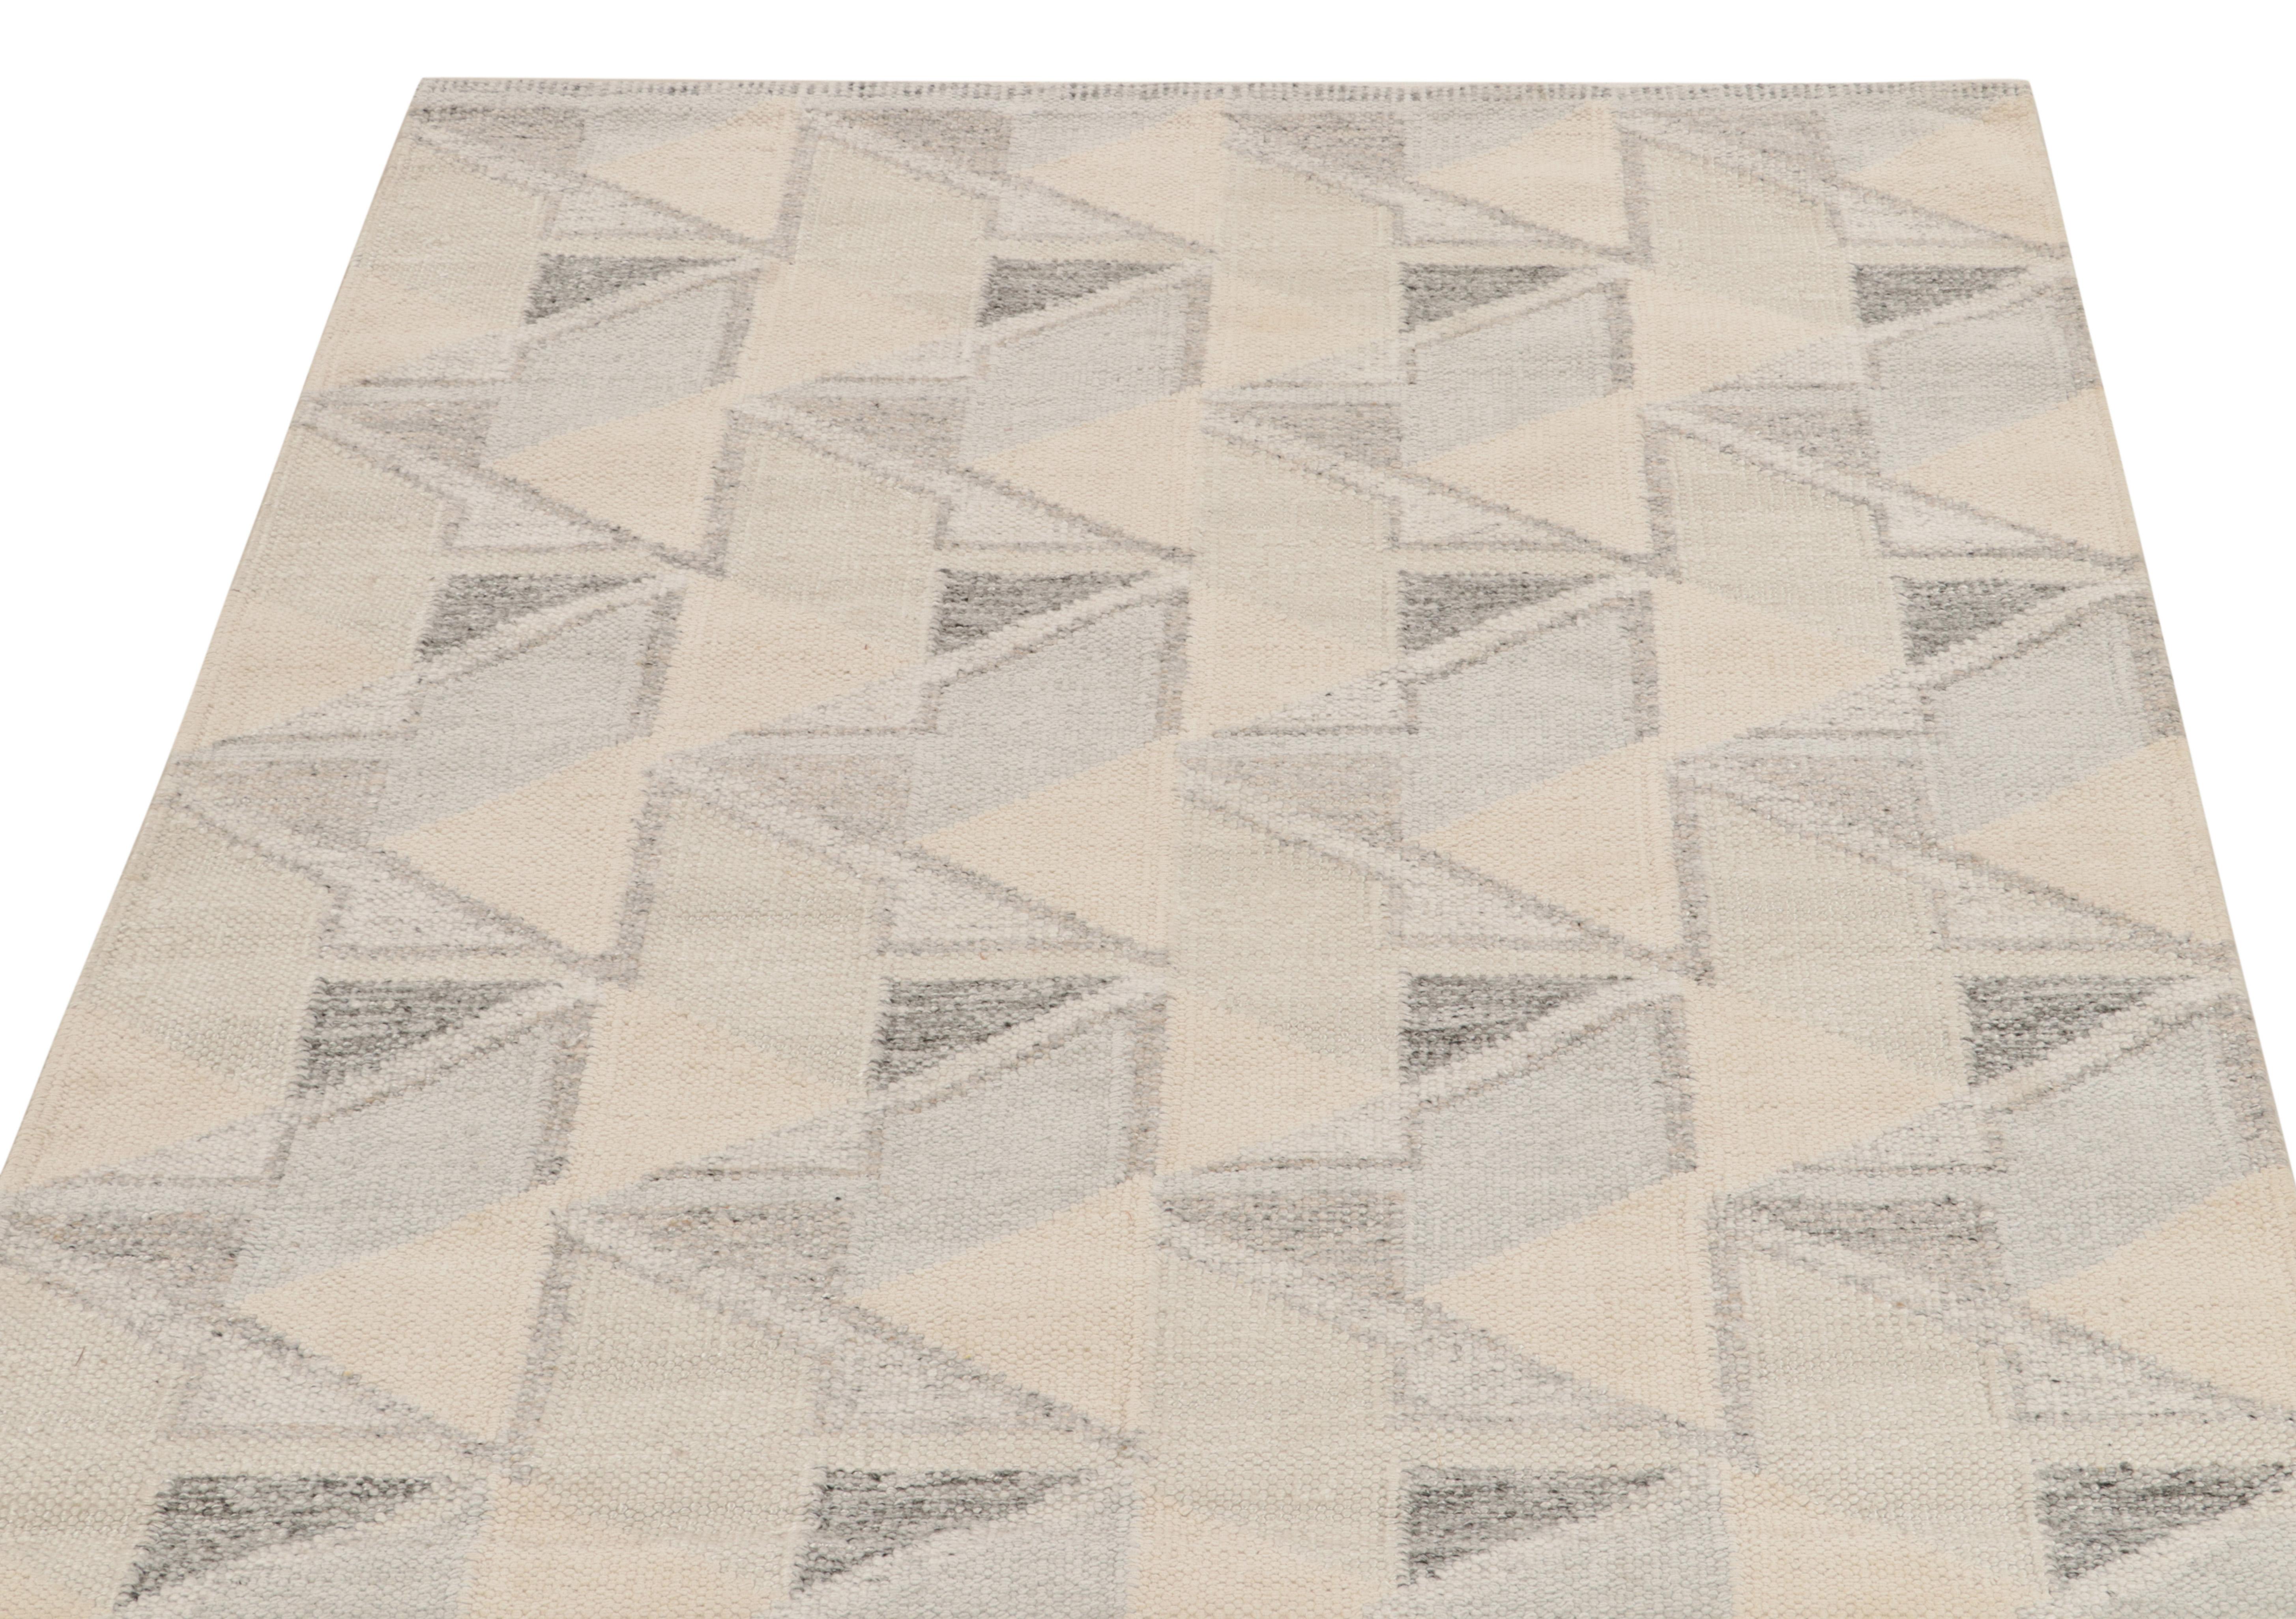 Rug & Kilim takes pride in introducing this unique interpretation of Scandinavian style from its award-winning flatweave selections inspired by the historic style. Handwoven in fine quality wool, this almost square rendering features a sharp